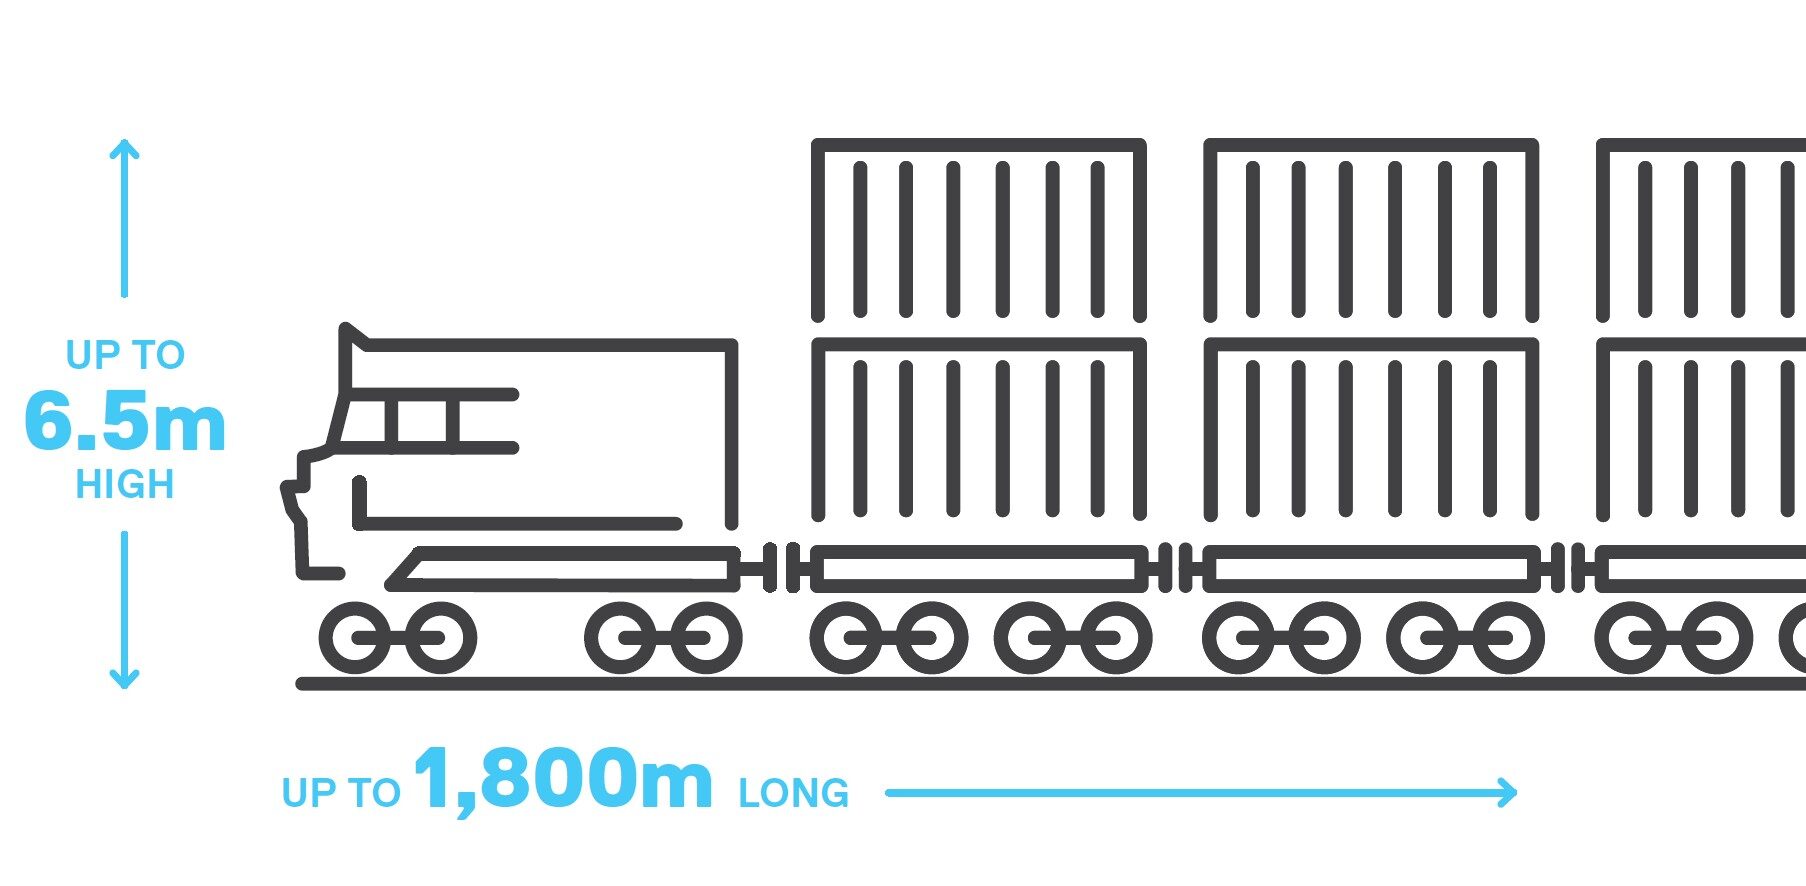 Inland Rail freight trains would be up to 1,800 metres long with double-stacked containers up to 6.5 metres high. The Inland Rail infrastructure has been designed to limit train lengths to 1,800 metres.